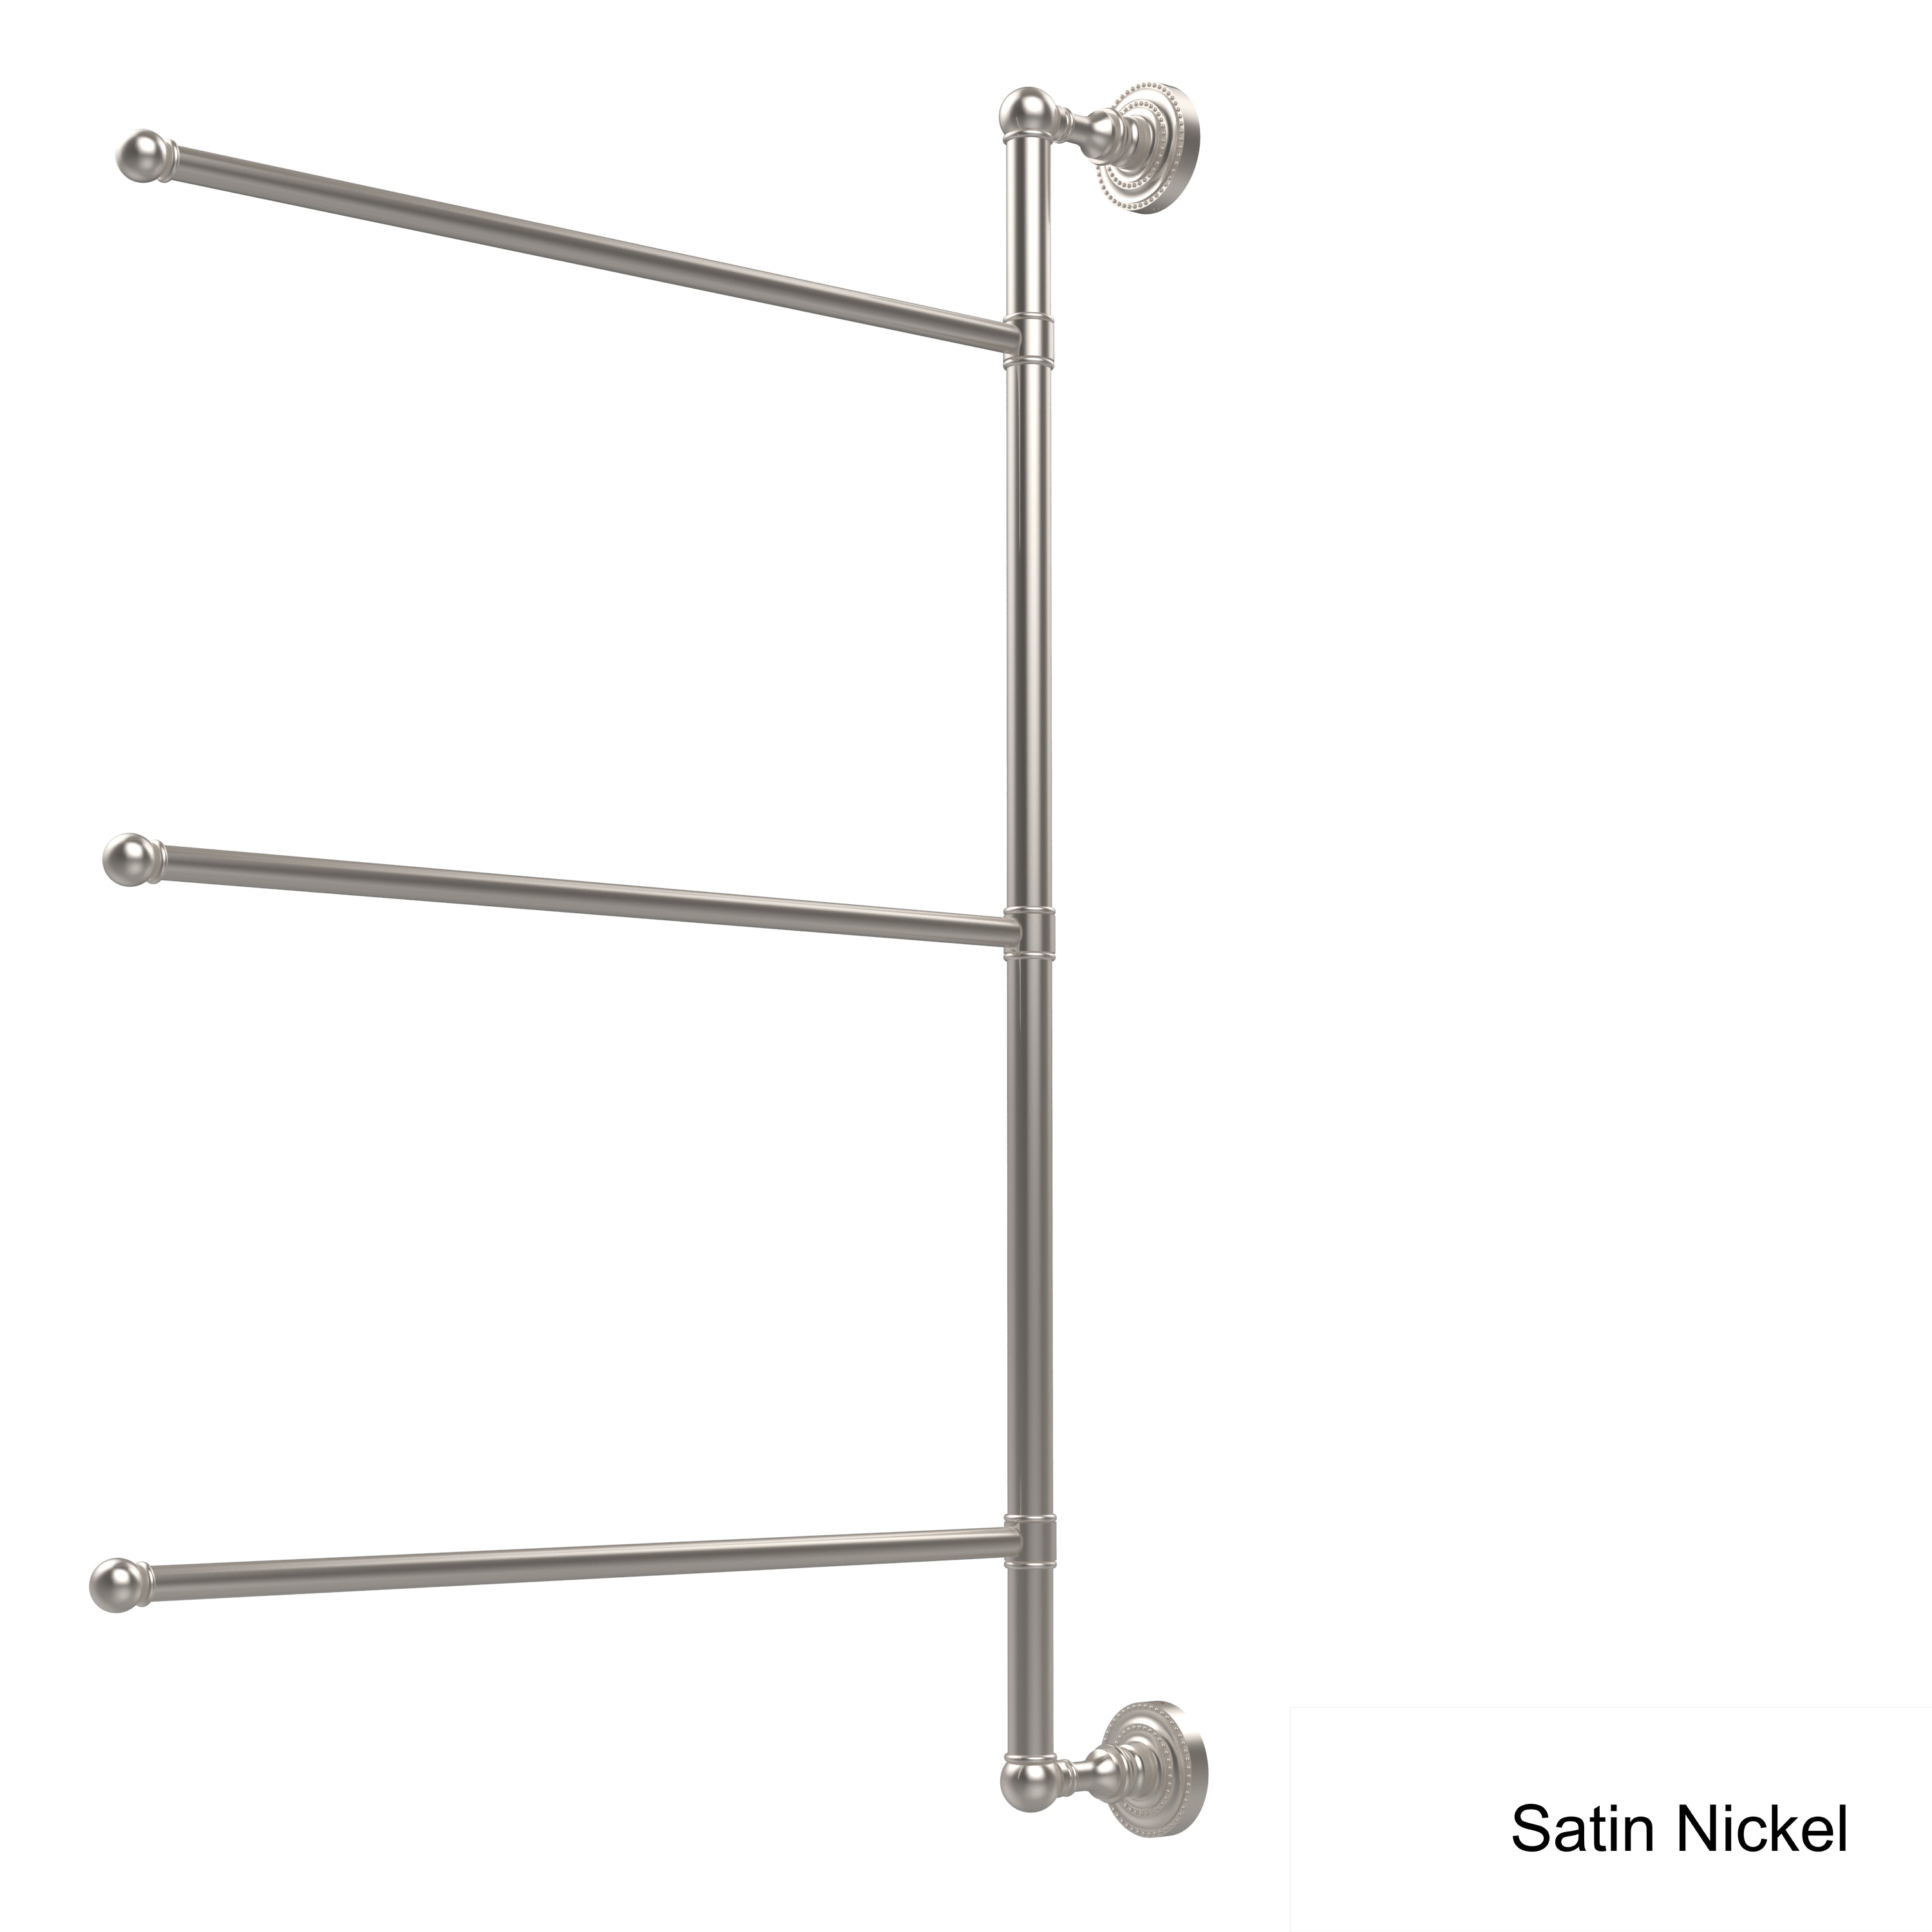 Allied Brass Dottingham Collection Wall Mounted Tumbler Holder - Satin Nickel